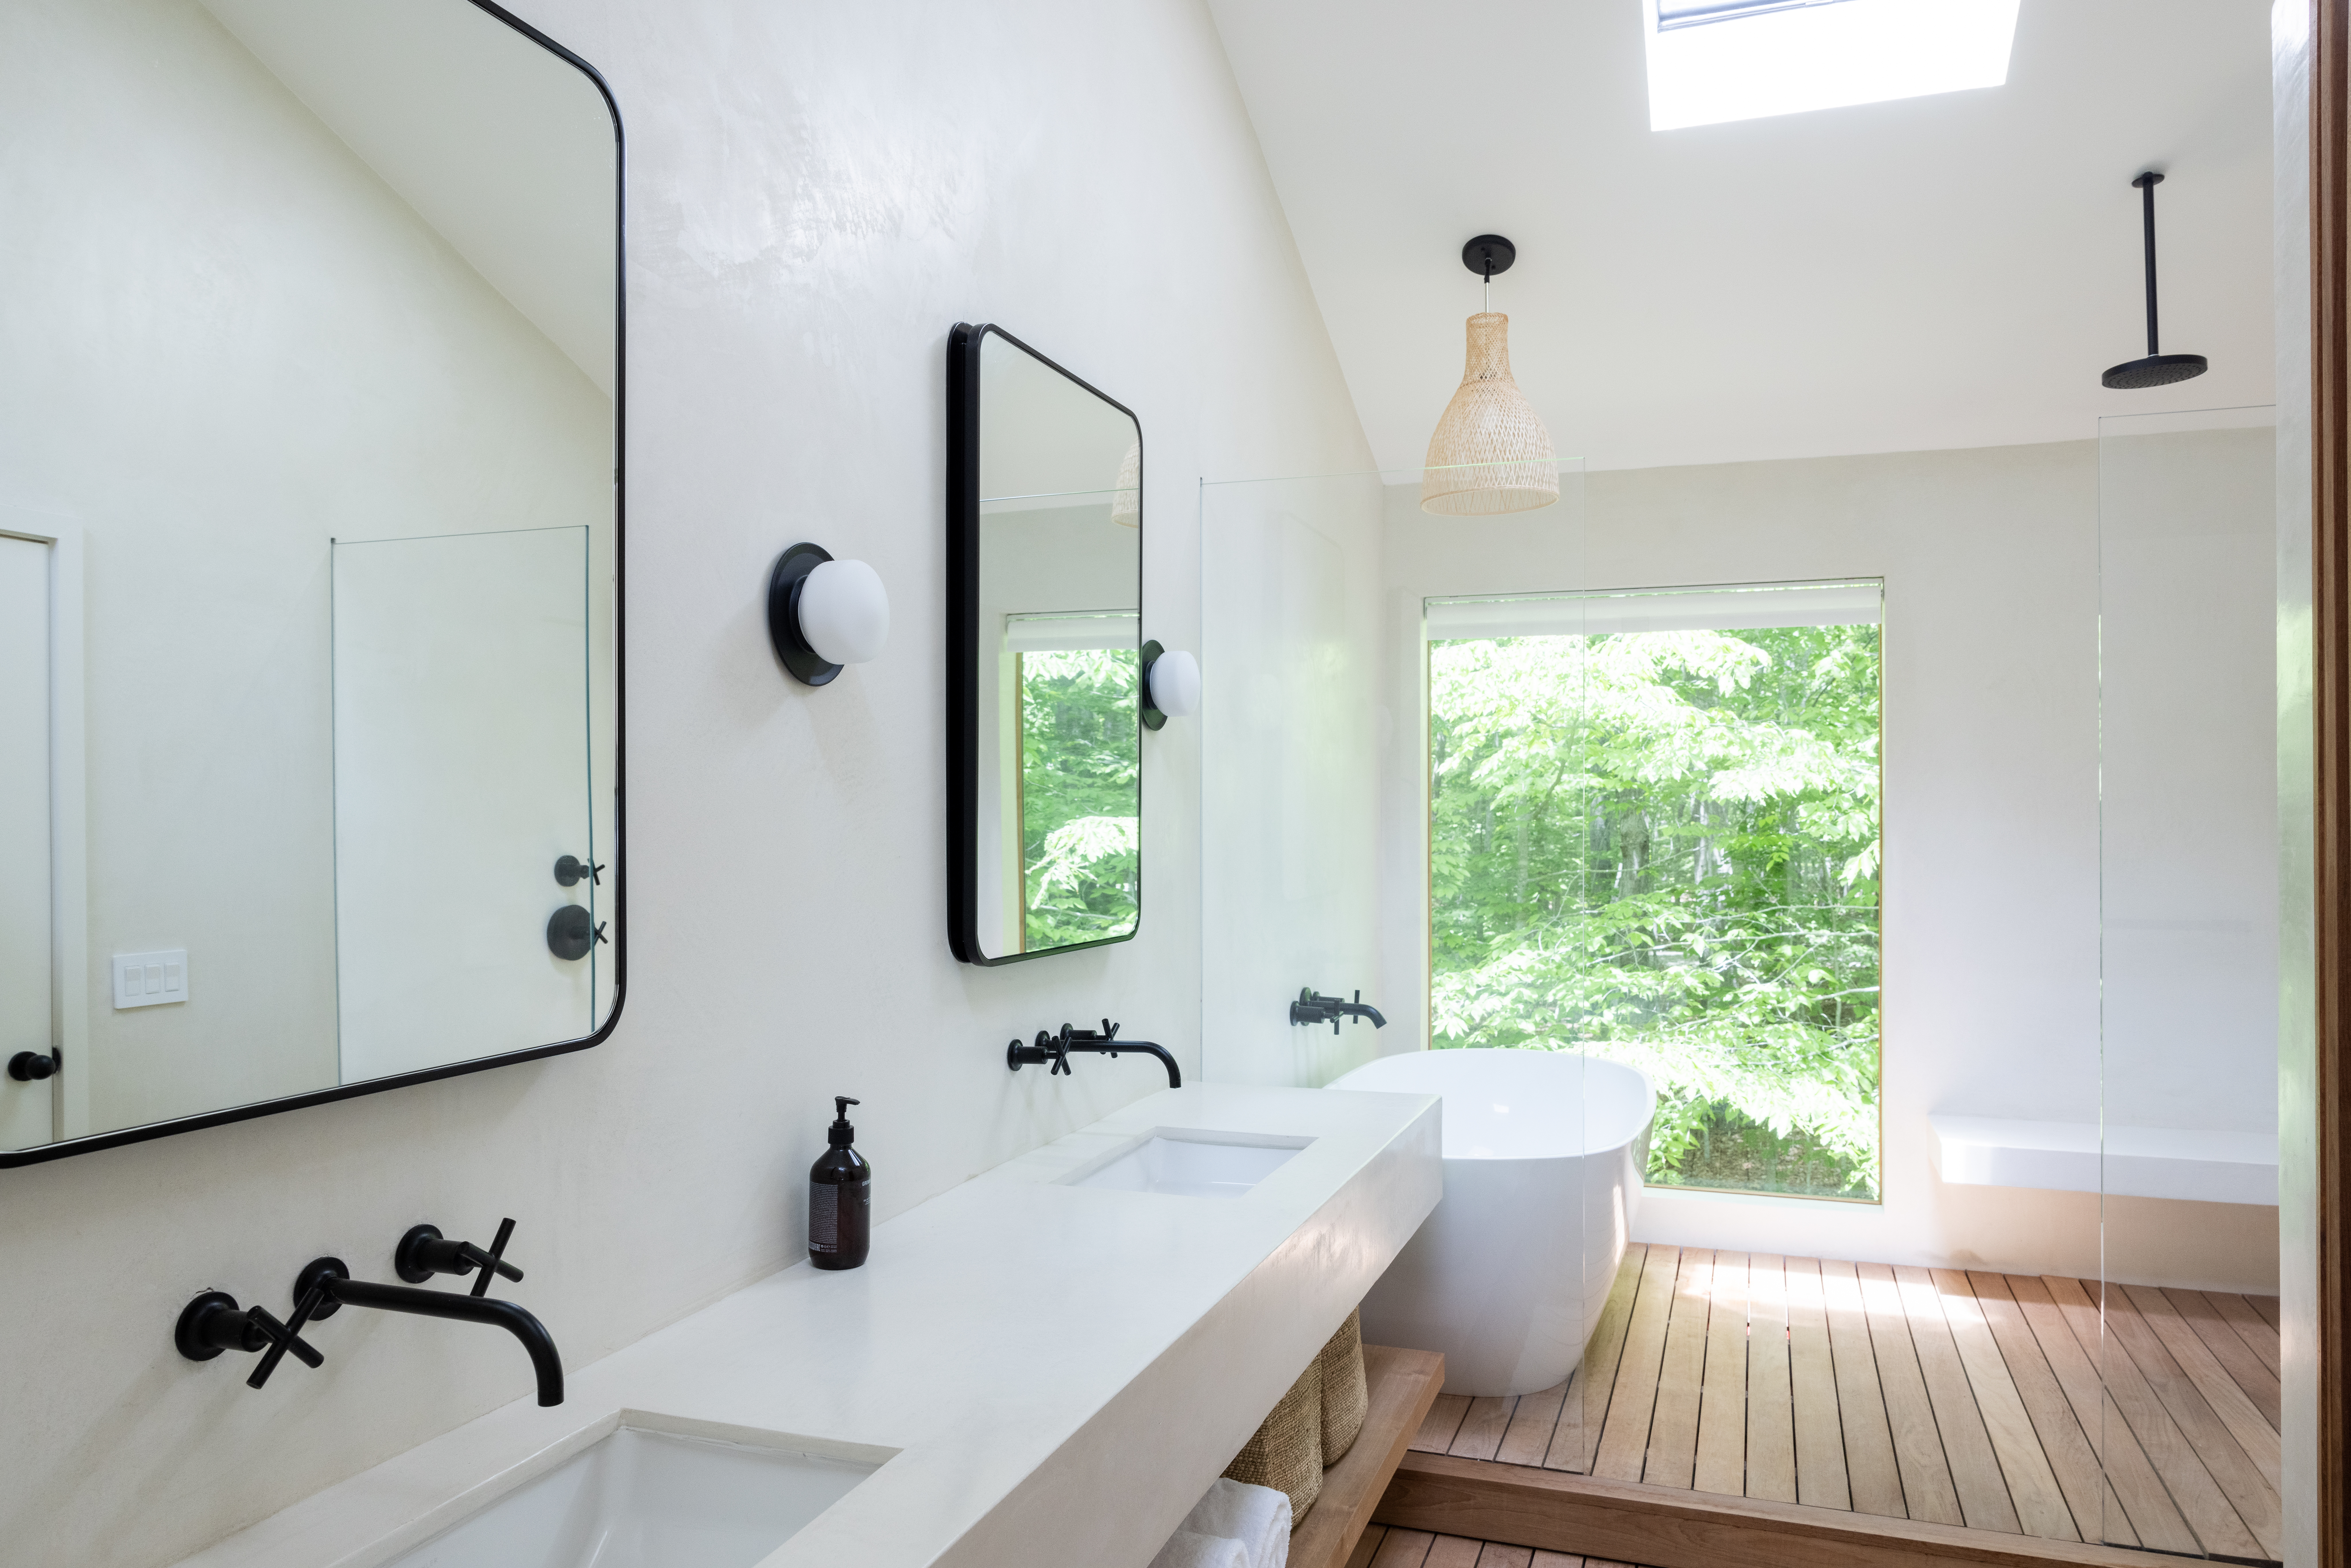 The Eco-friendly Bathroom Still Tops the List in 2022 Trends